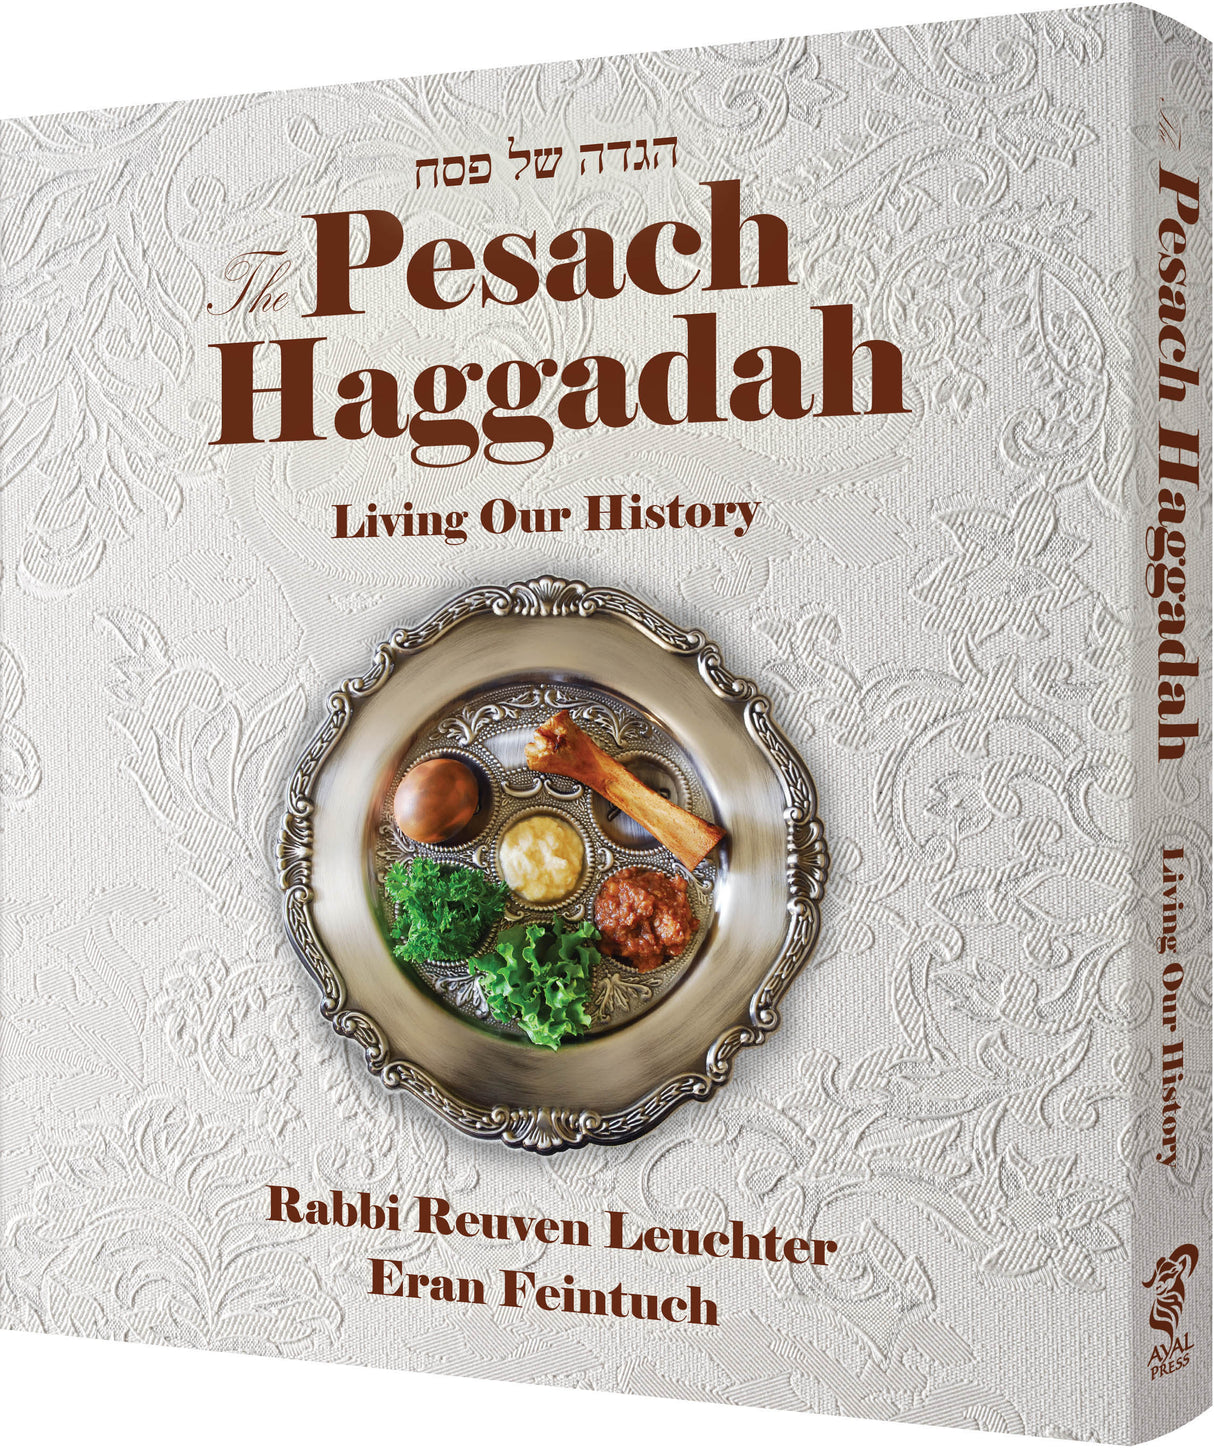 The Pesach Haggadah Living Our History